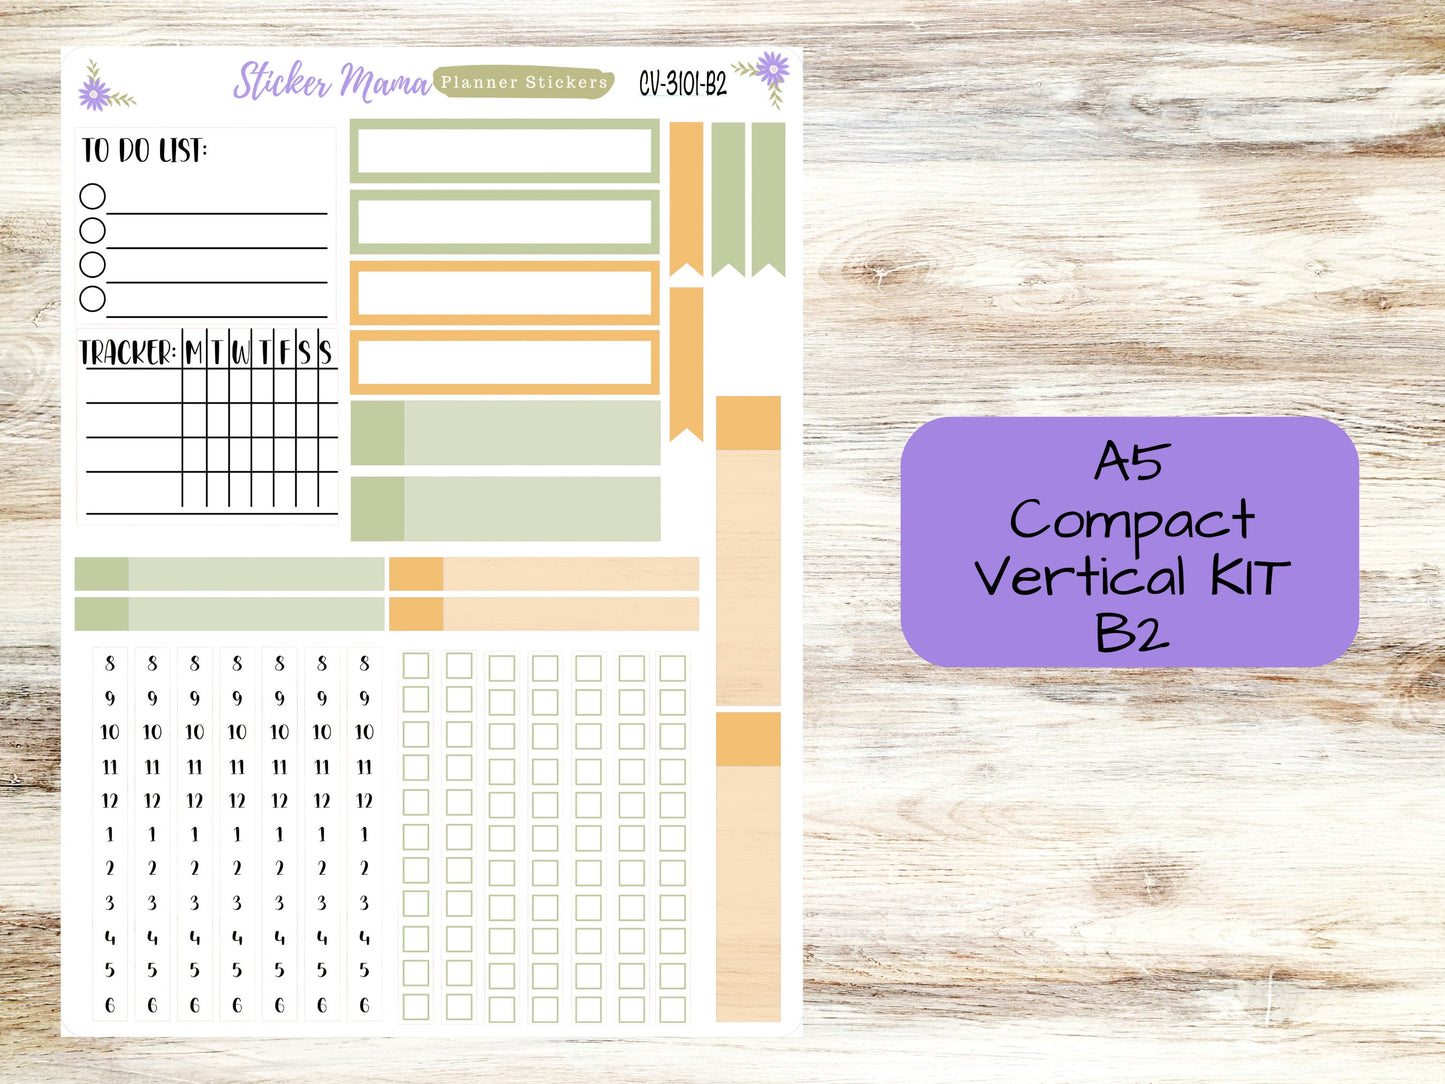 A5 COMPACT VERTICAL-Kit #3101 || Blooming Sunflowers  - Compact Vertical - Planner Stickers - Erin Condren Compact Vertical Weekly Kit